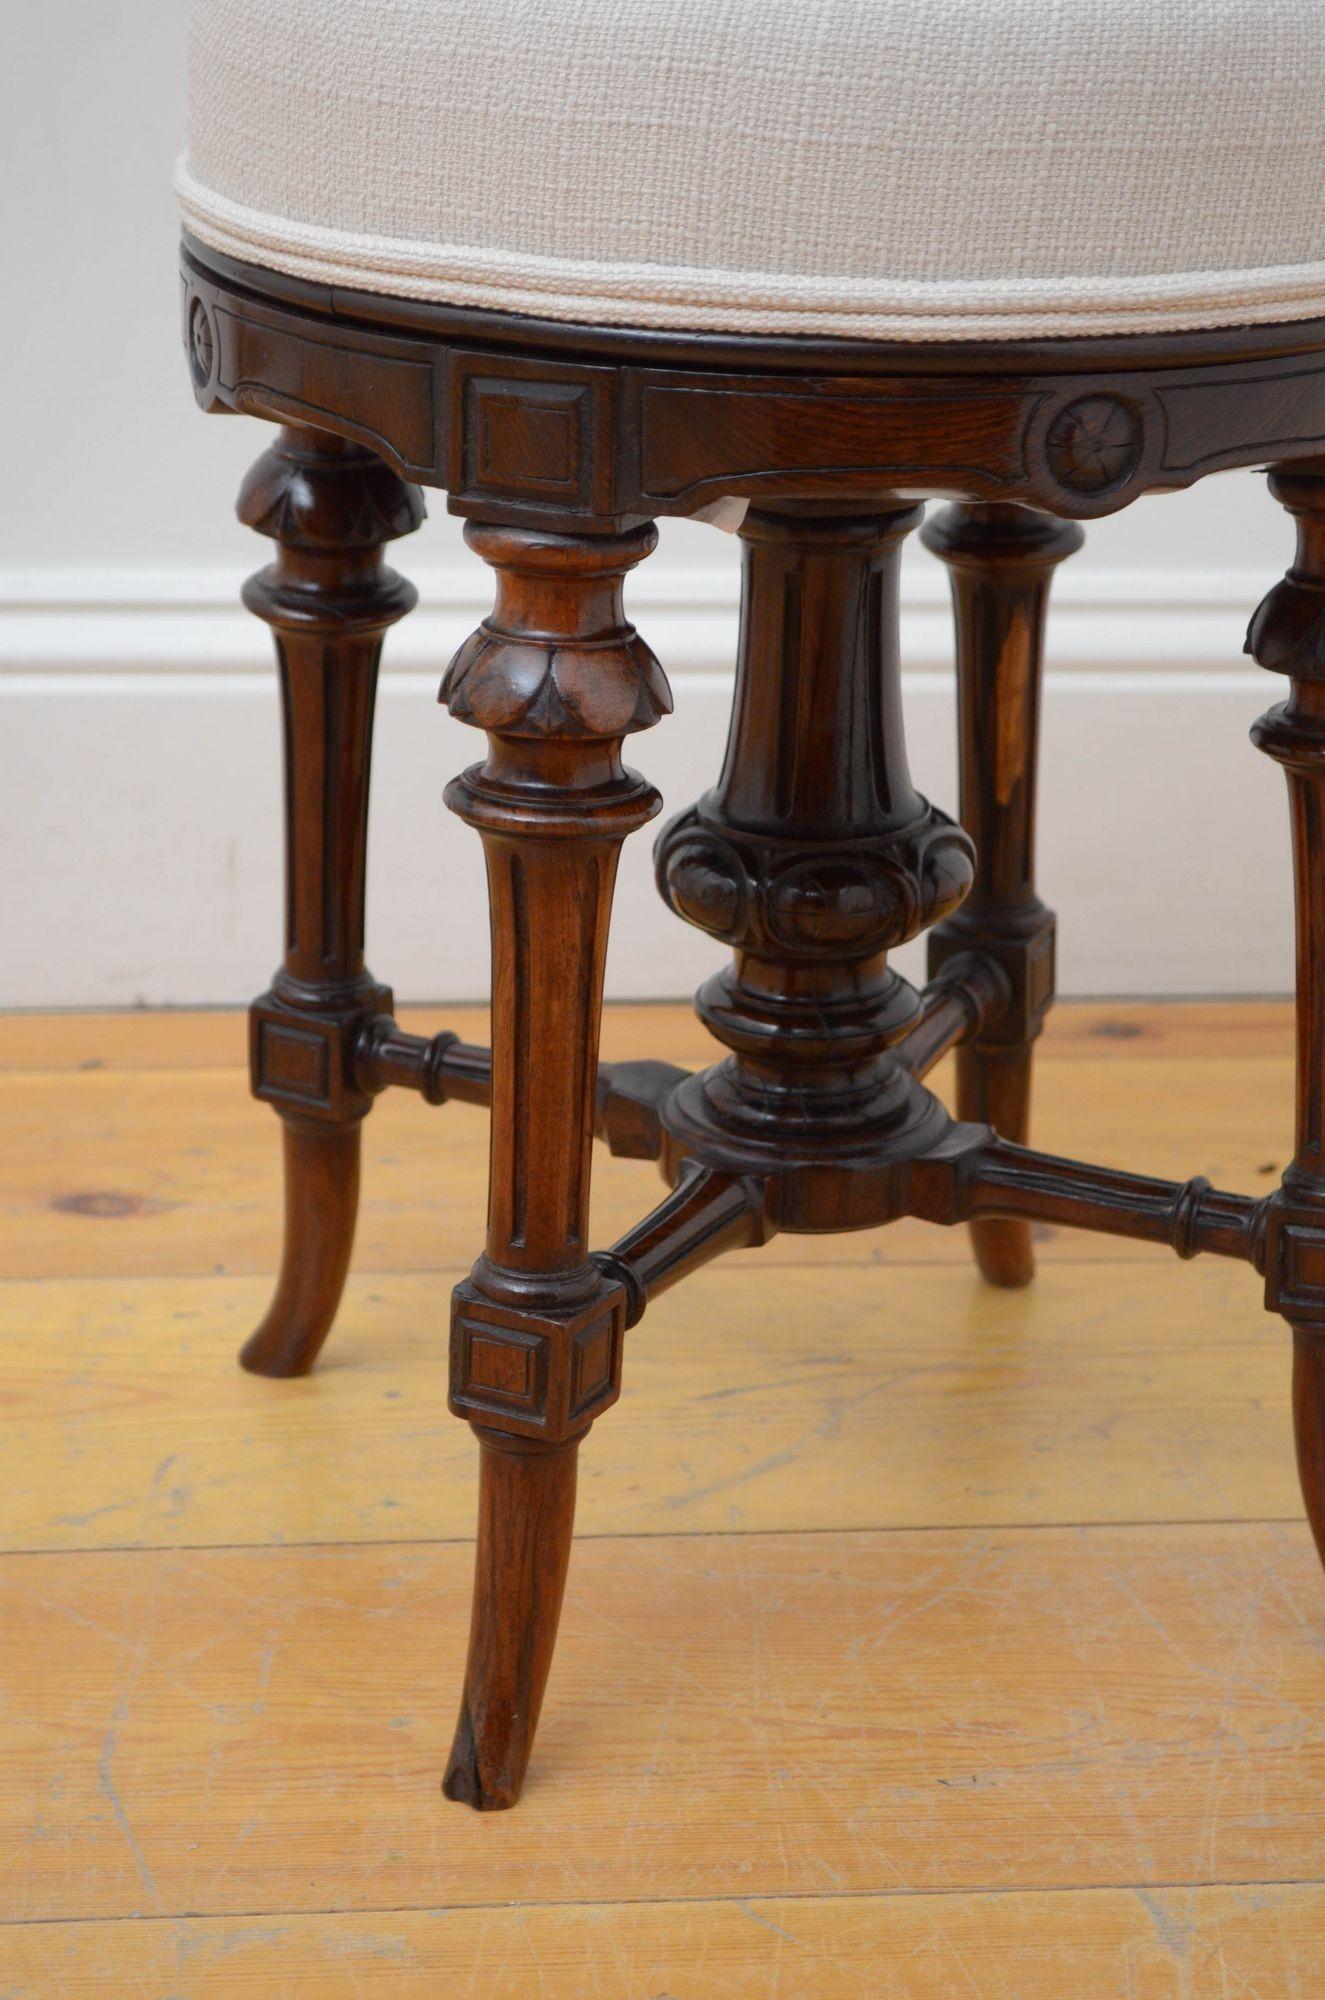 Victorian Rosewood Revolving Stool In Good Condition For Sale In Whaley Bridge, GB